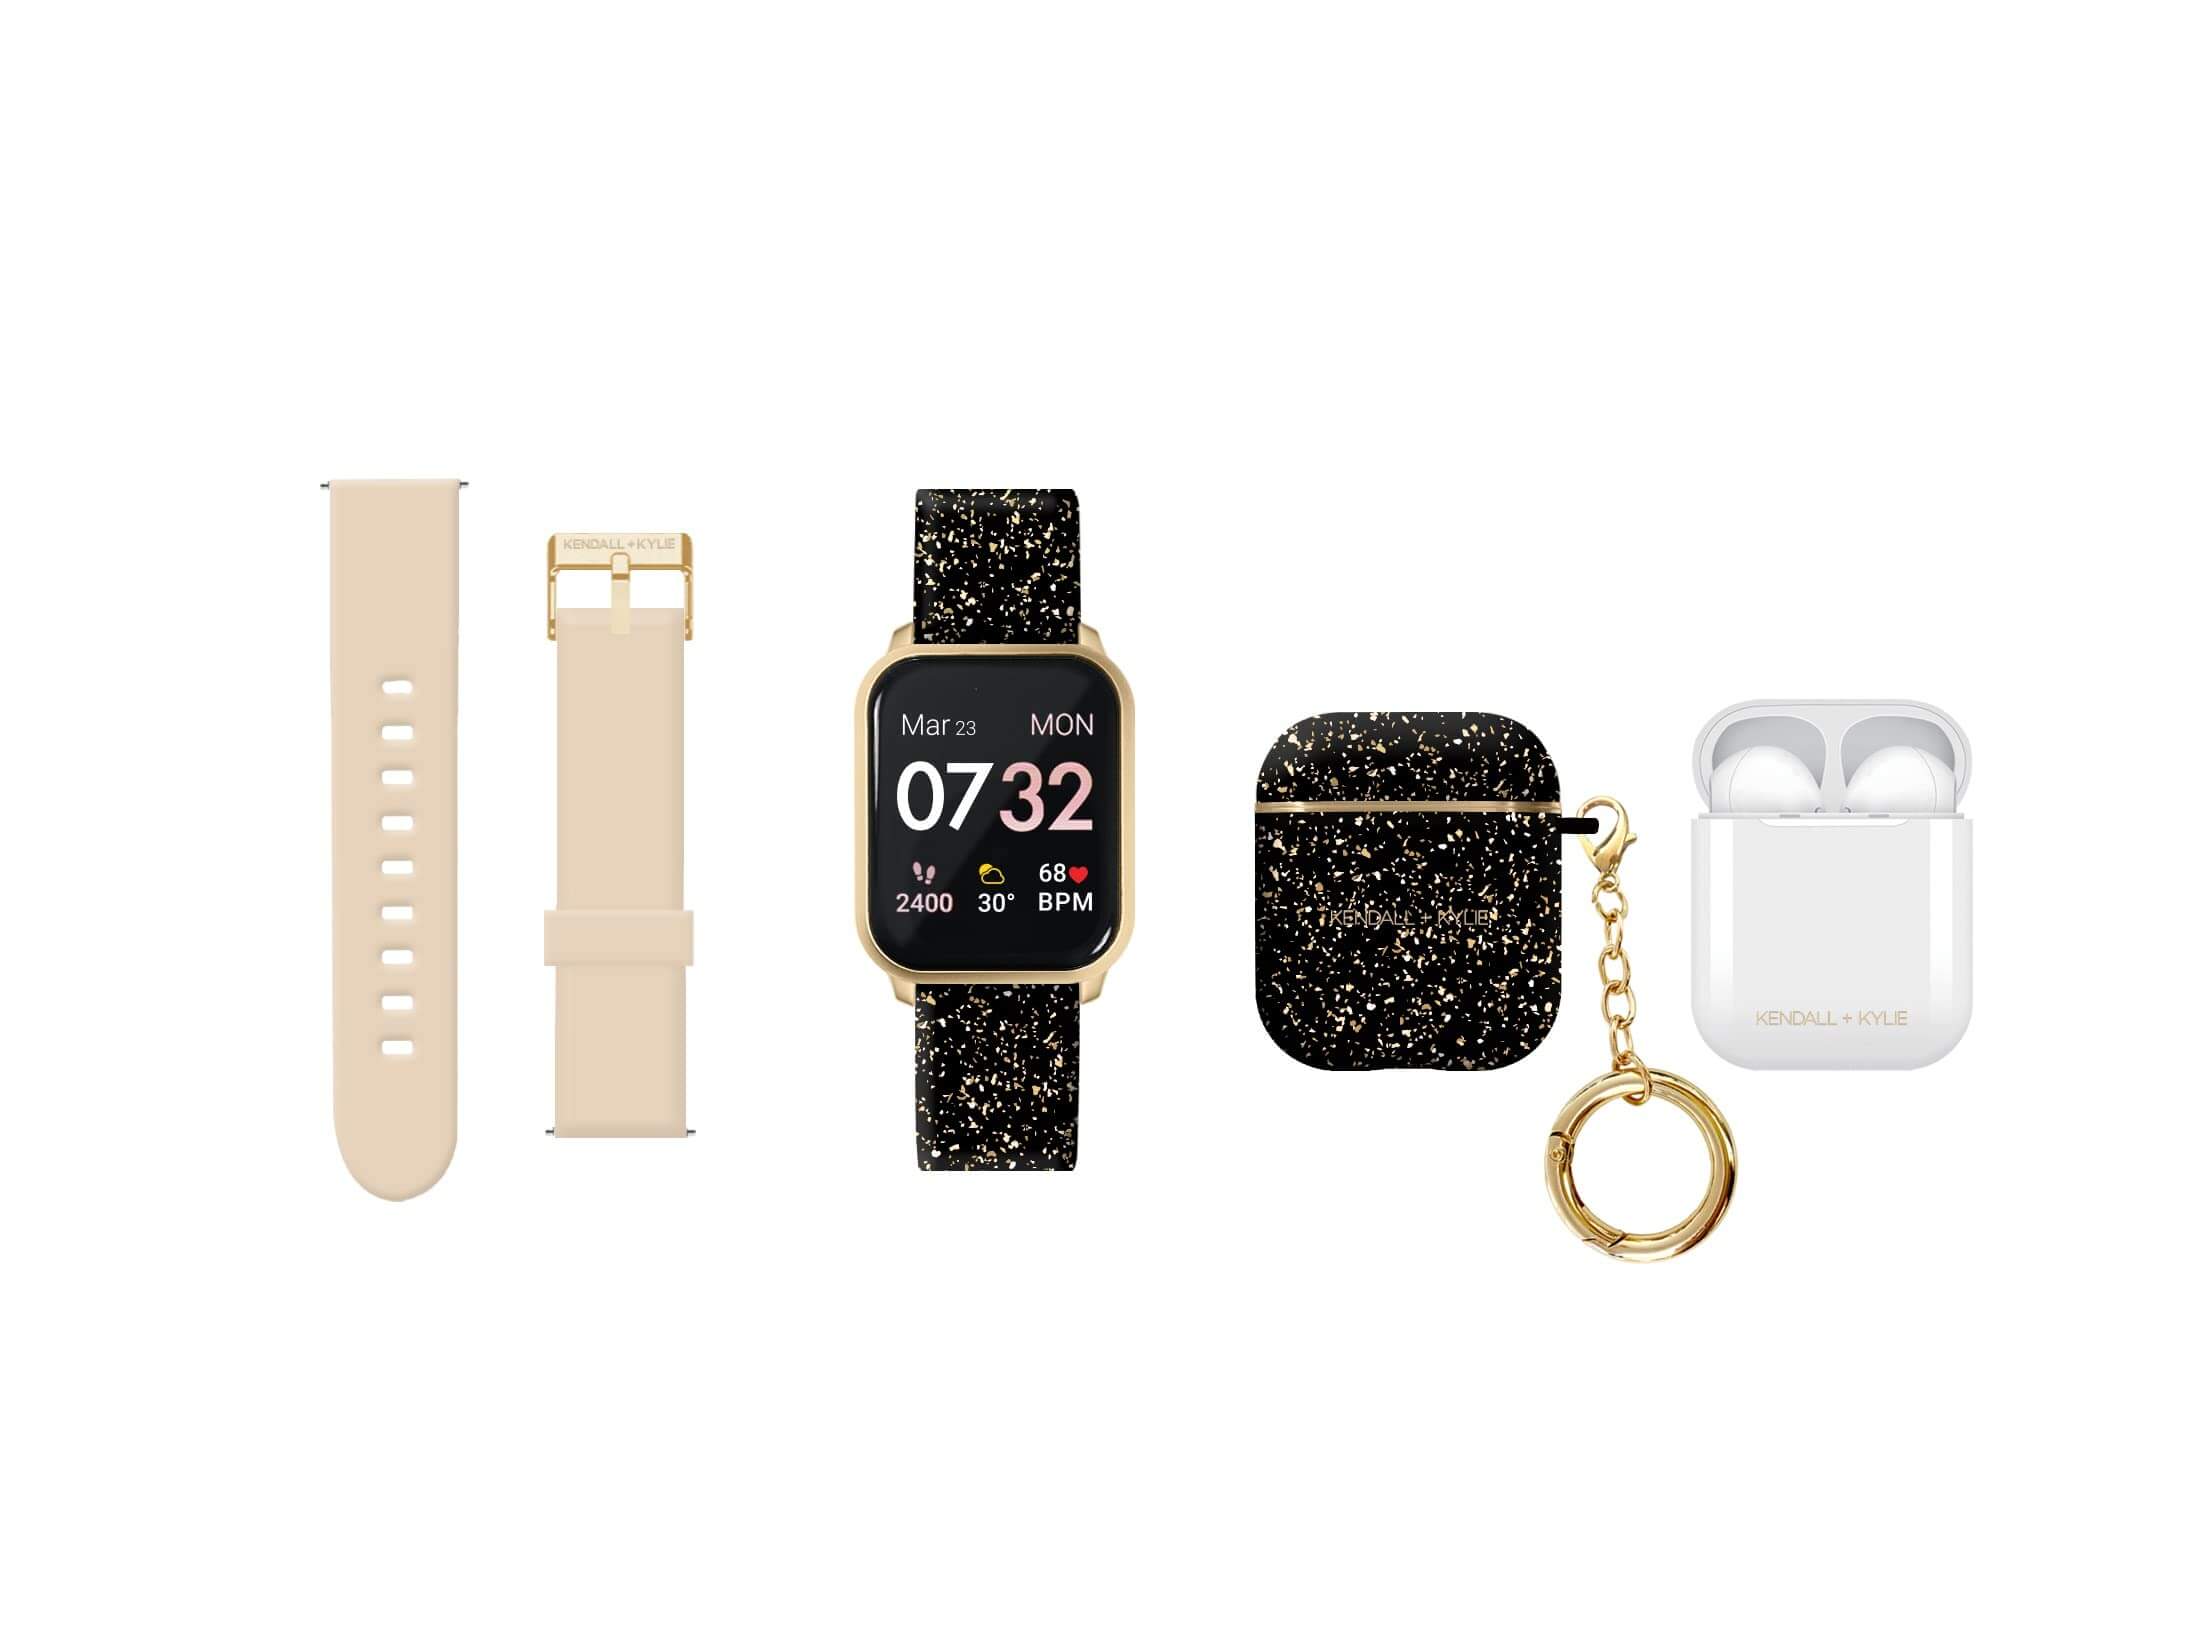 Smartwatch with Personalized Features